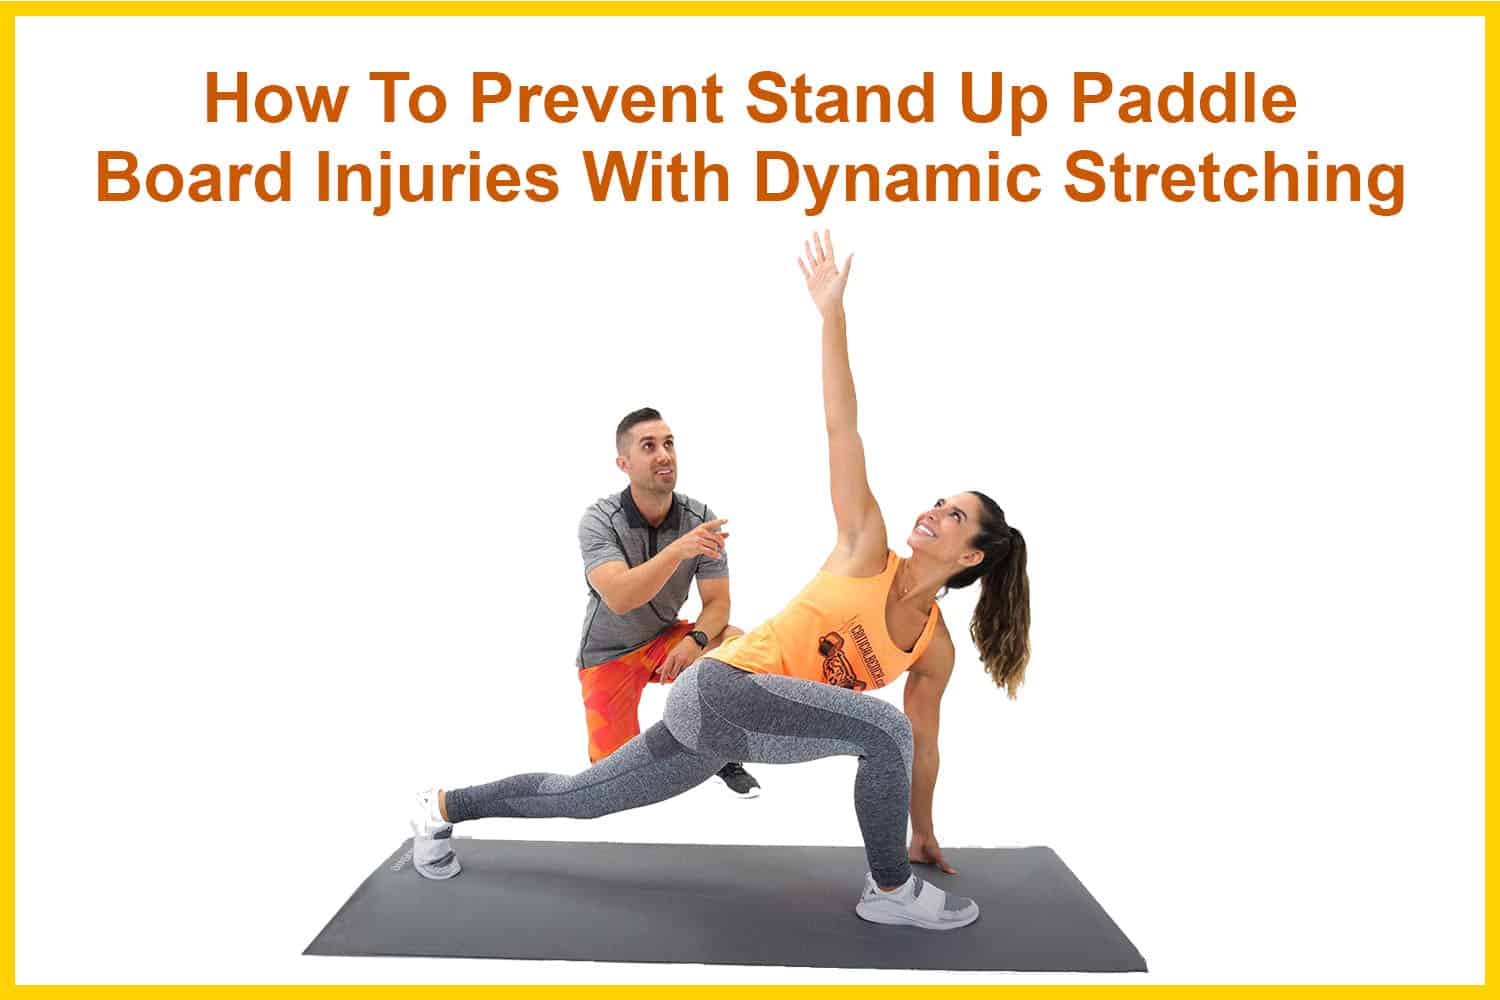 How to Prevent Stand Up Paddle Board Injuries with Dynamic Stretching